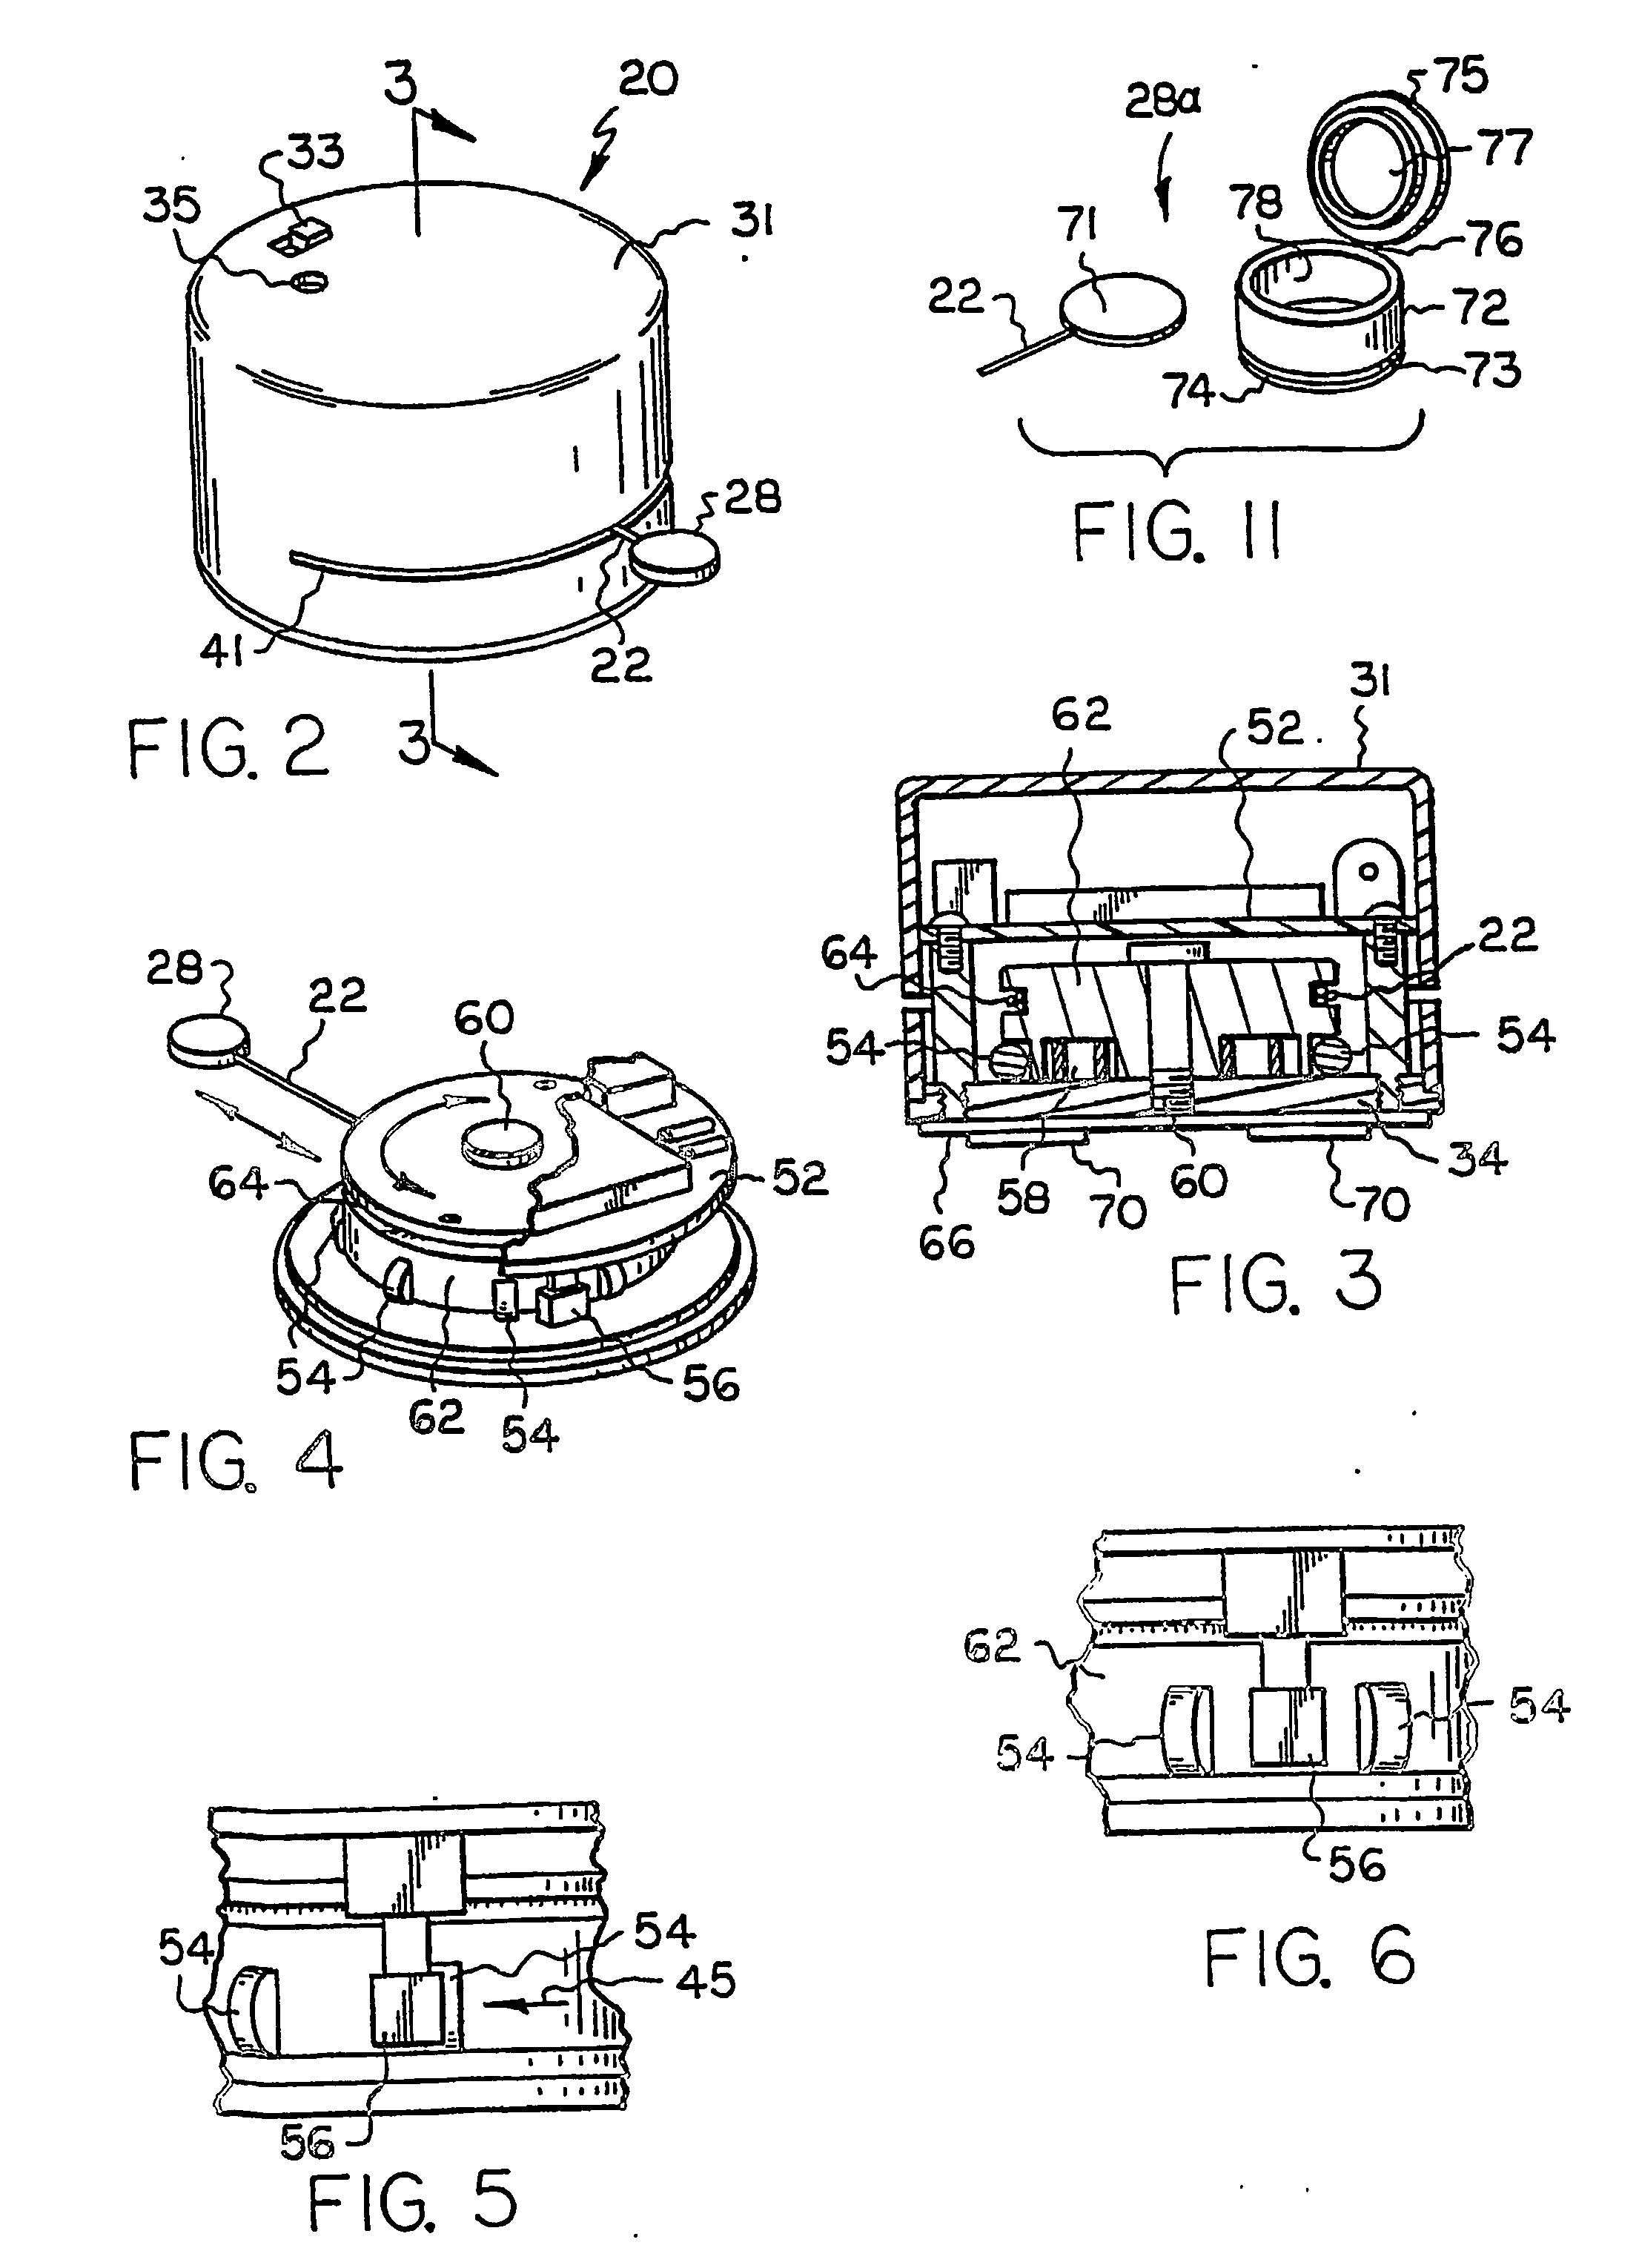 Portable motion detector and alarm system and method